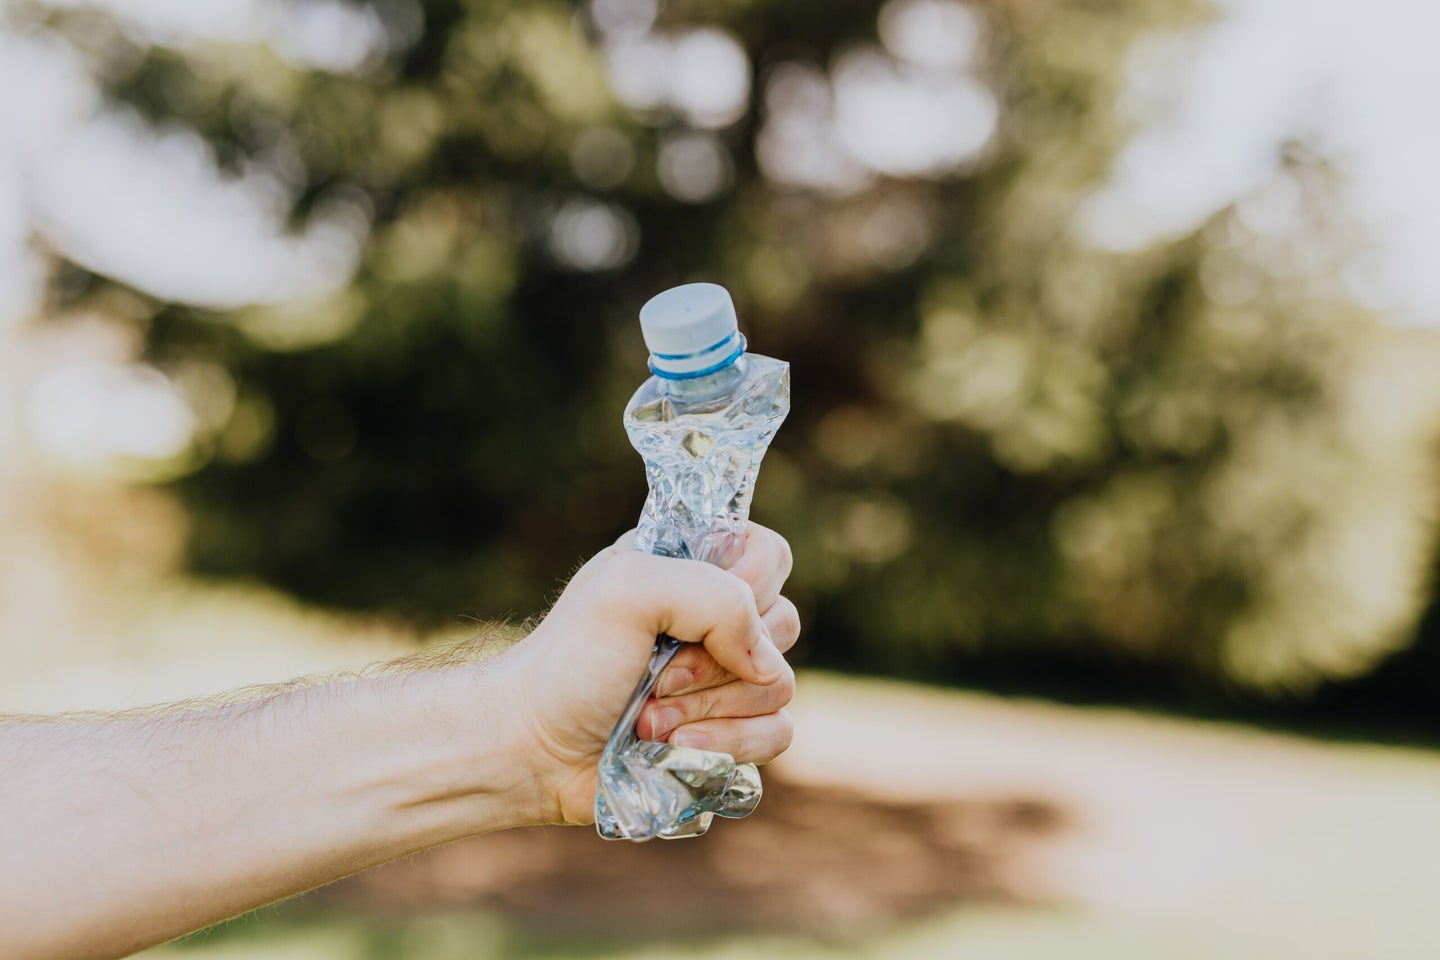 Crushed single-use plastic water bottle in hand.